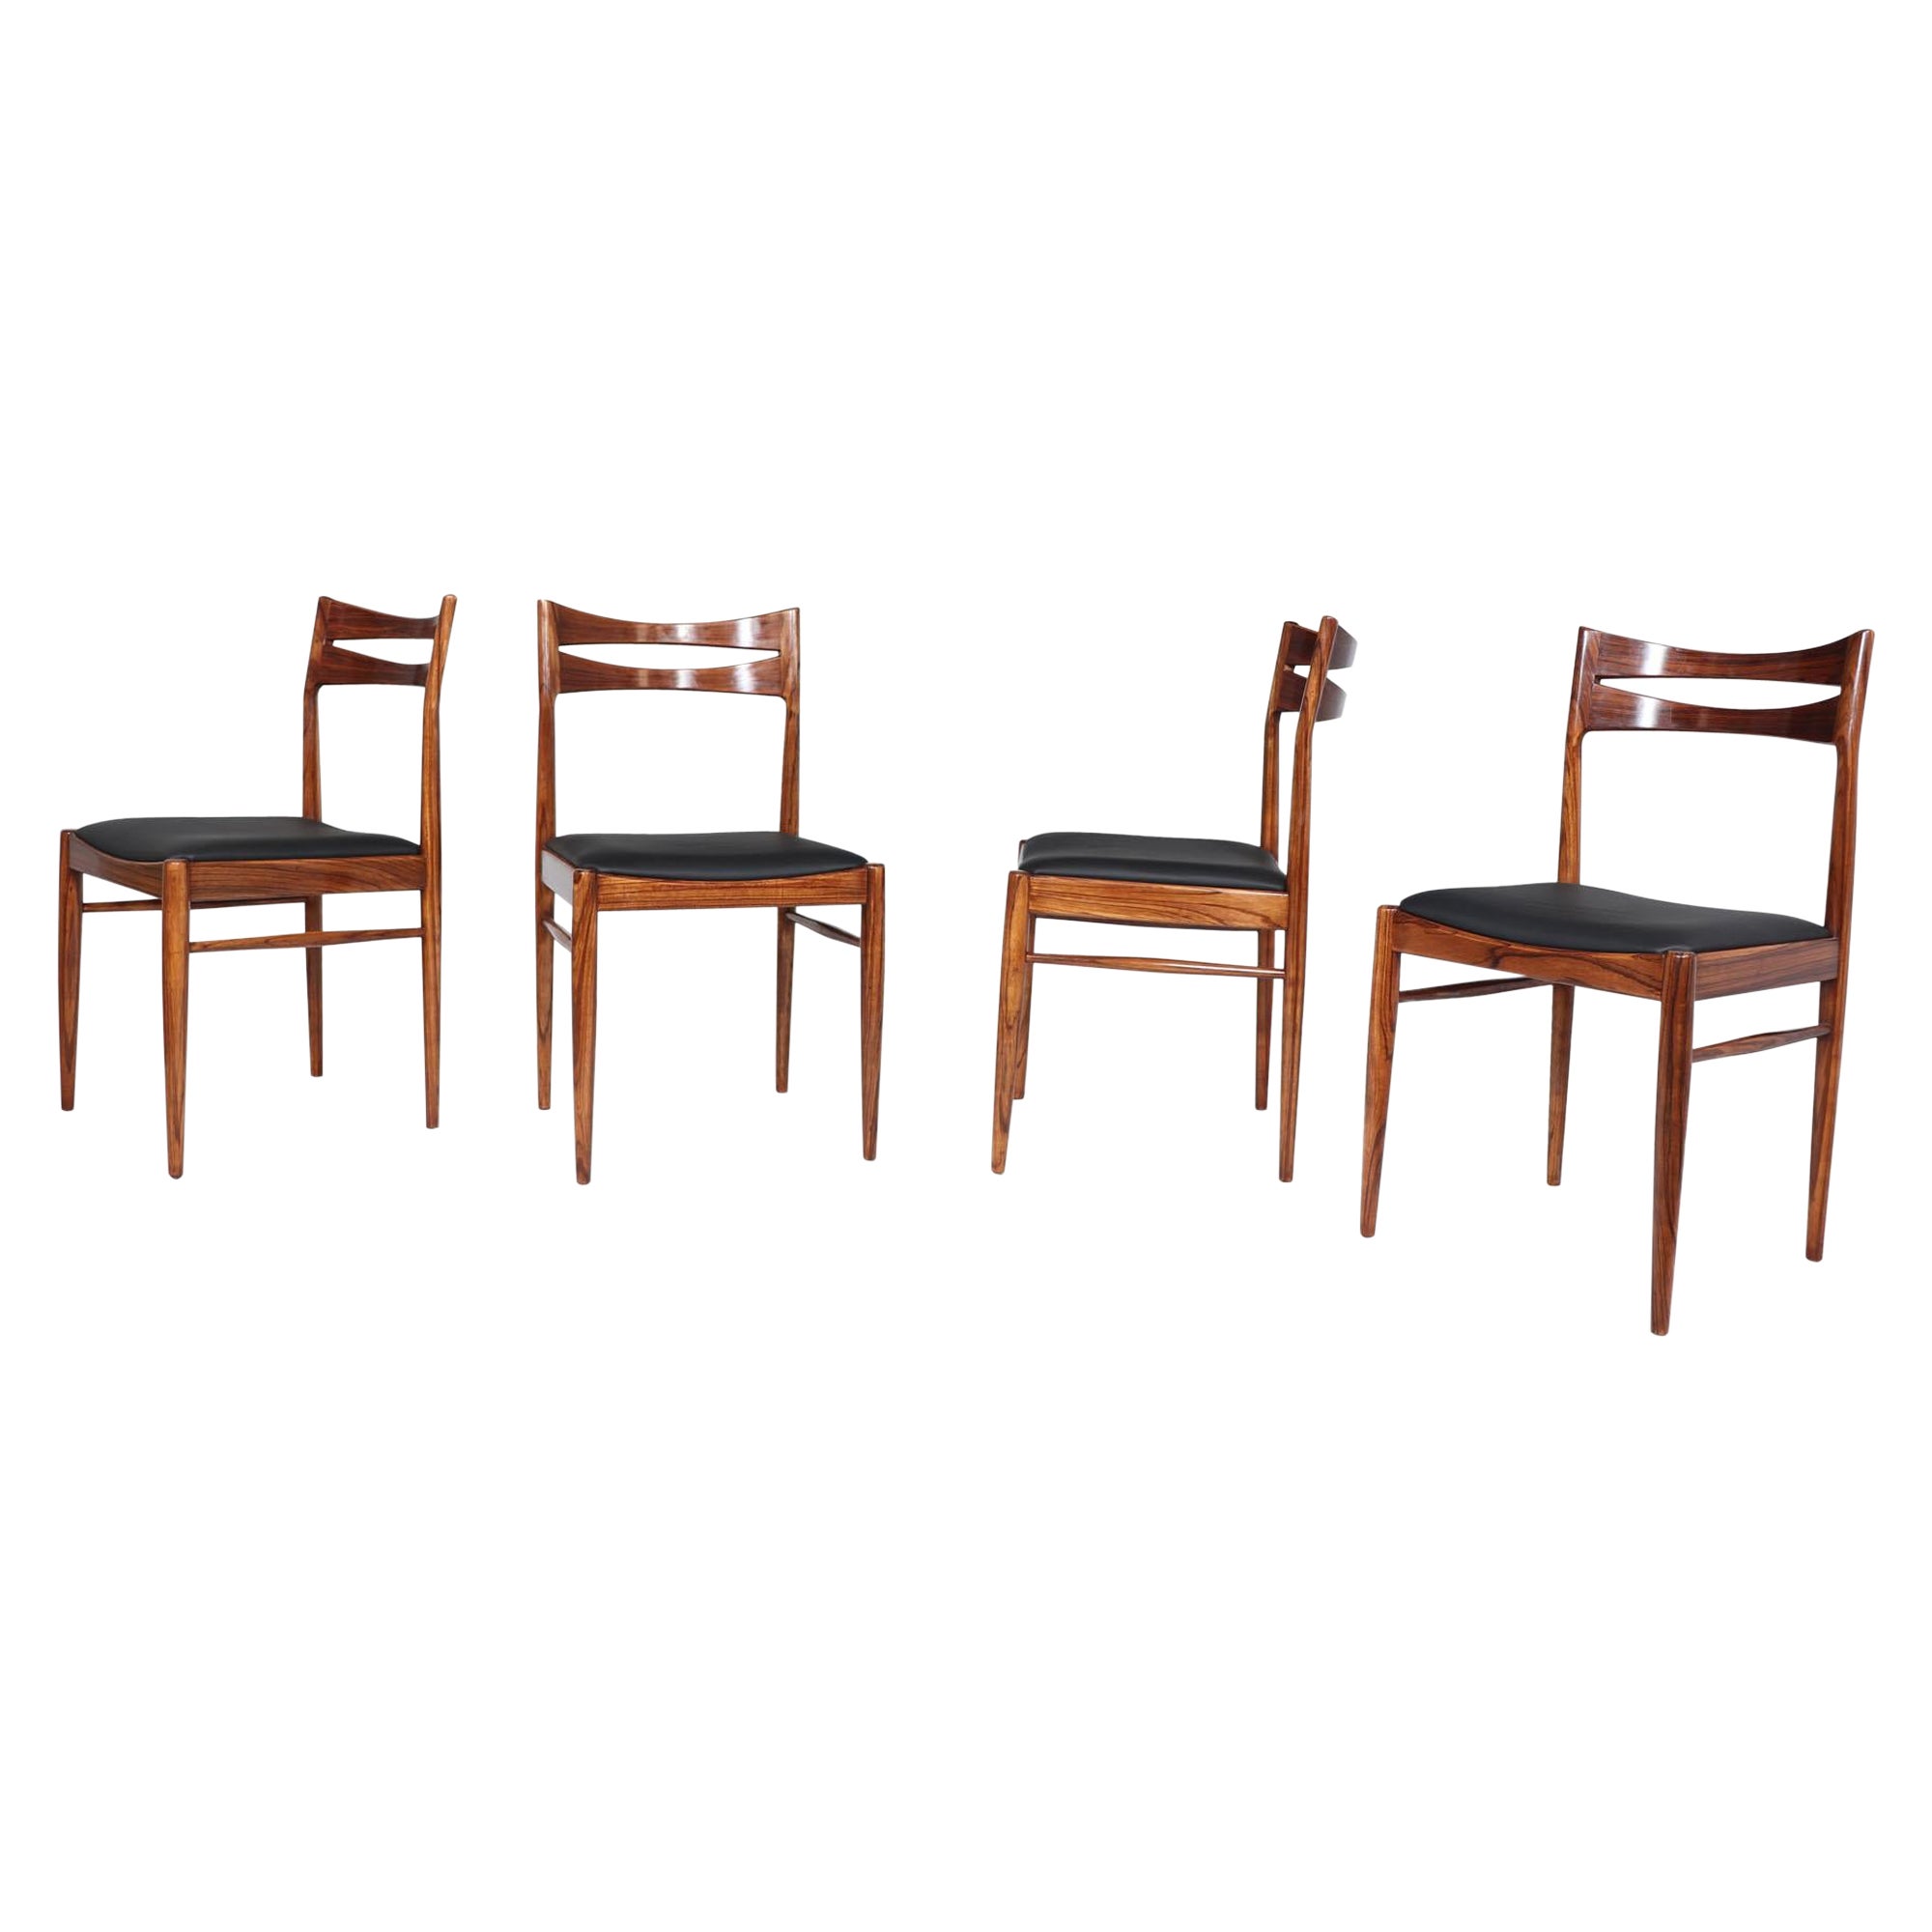 Set of Four Mid-Century Danish Dining Chairs